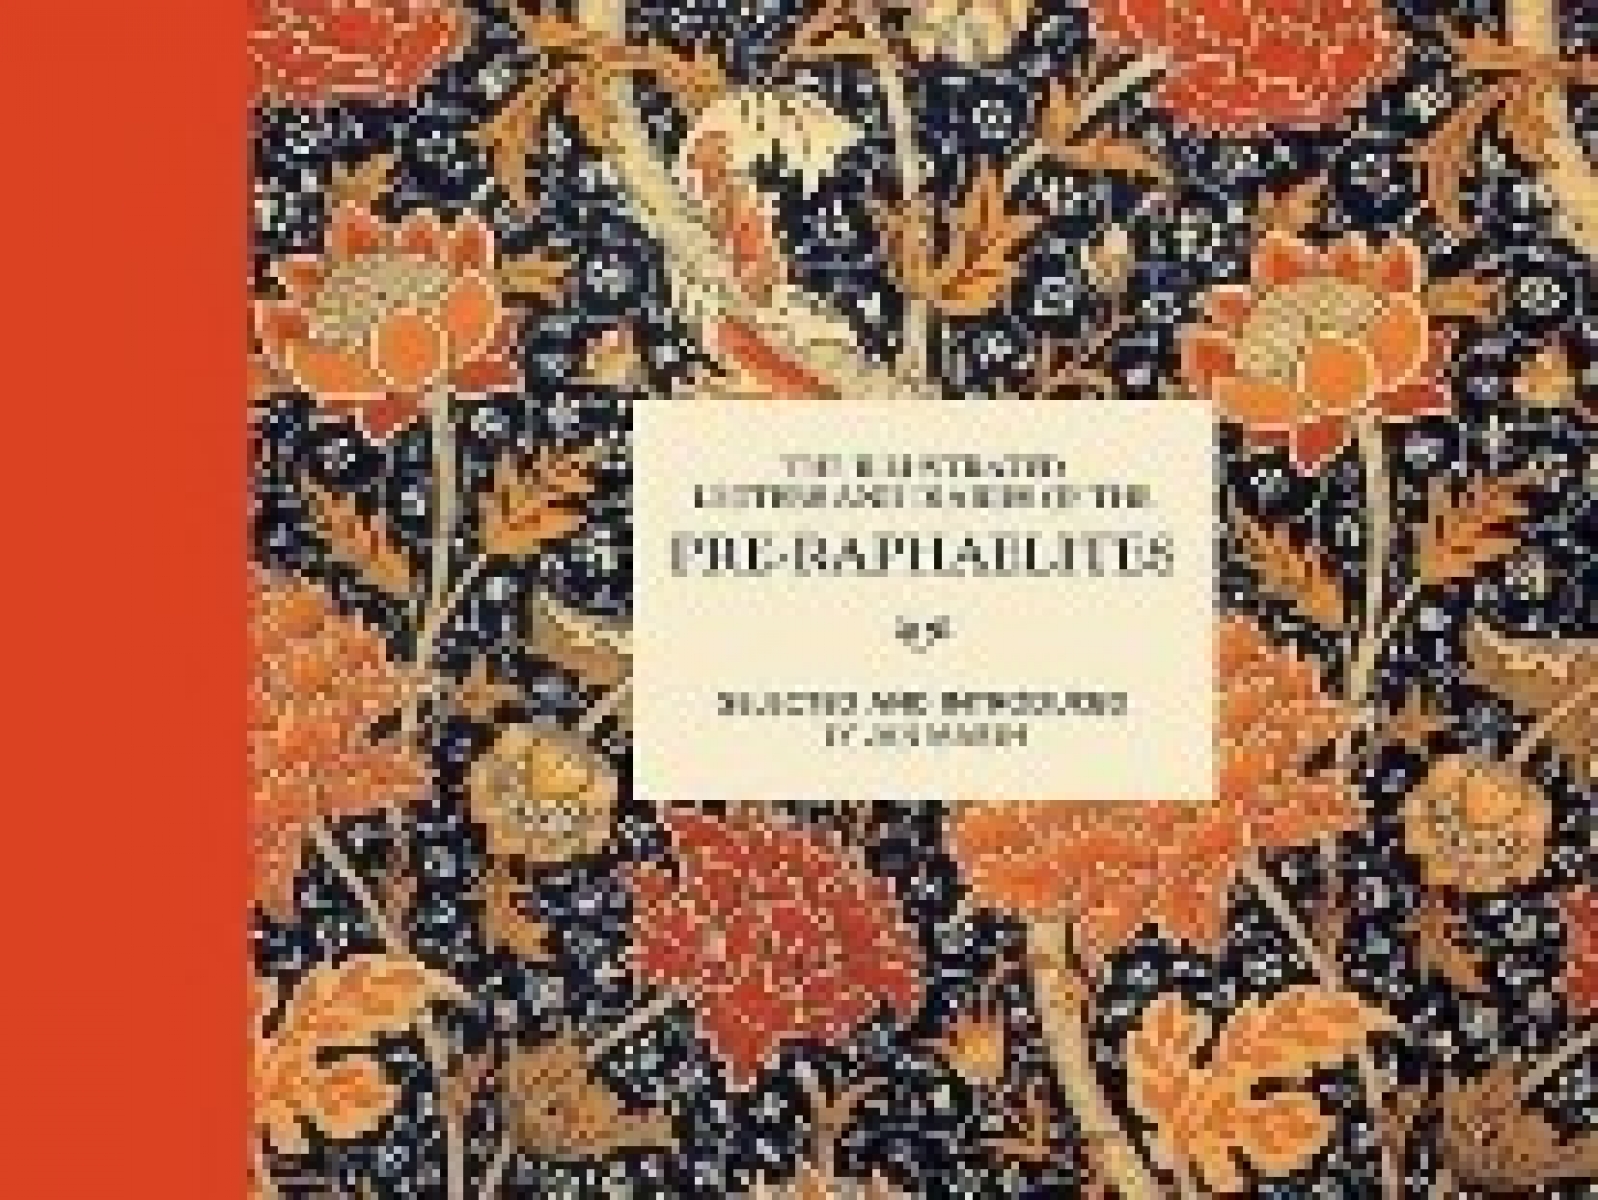 Jan, Marsh Illustrated letters and diaries of the pre-raphaelites 